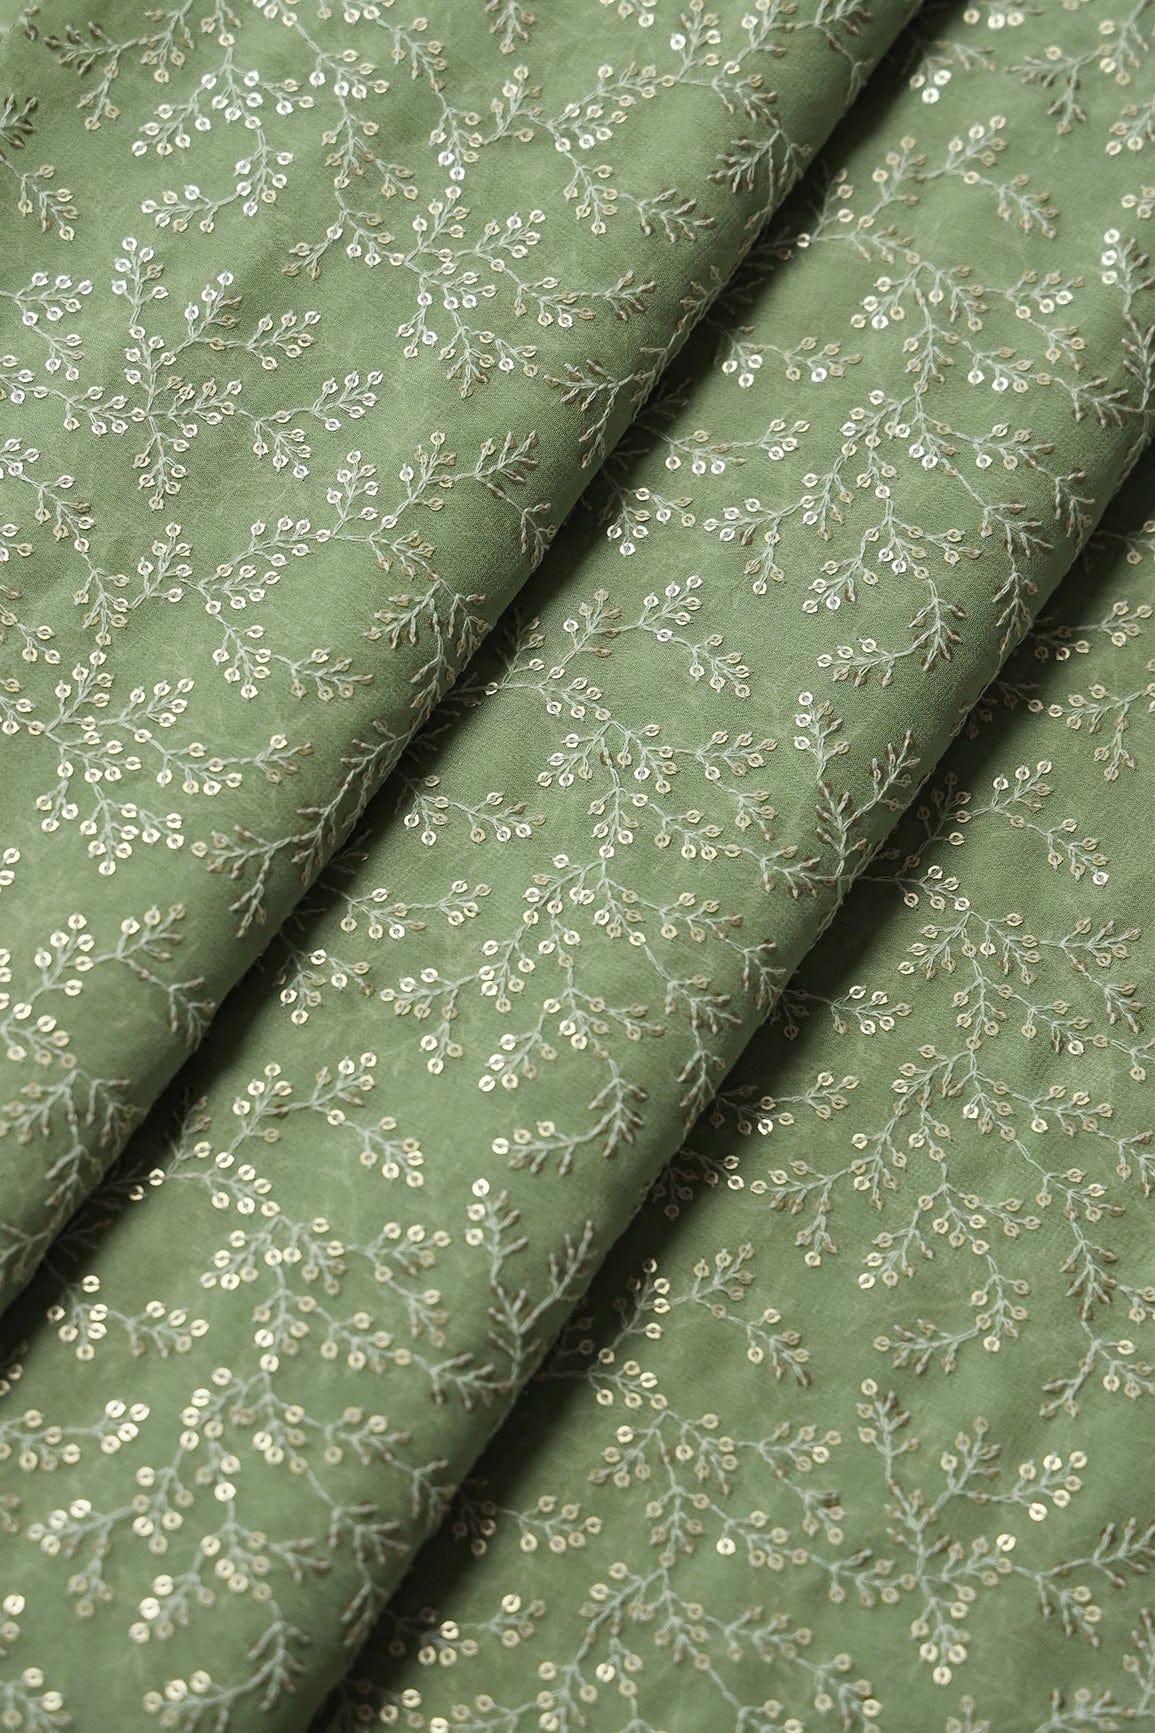 doeraa Plain Fabrics White Thread With Gold Sequins Leafy Embroidery Work On Olive Viscose Georgette Fabric